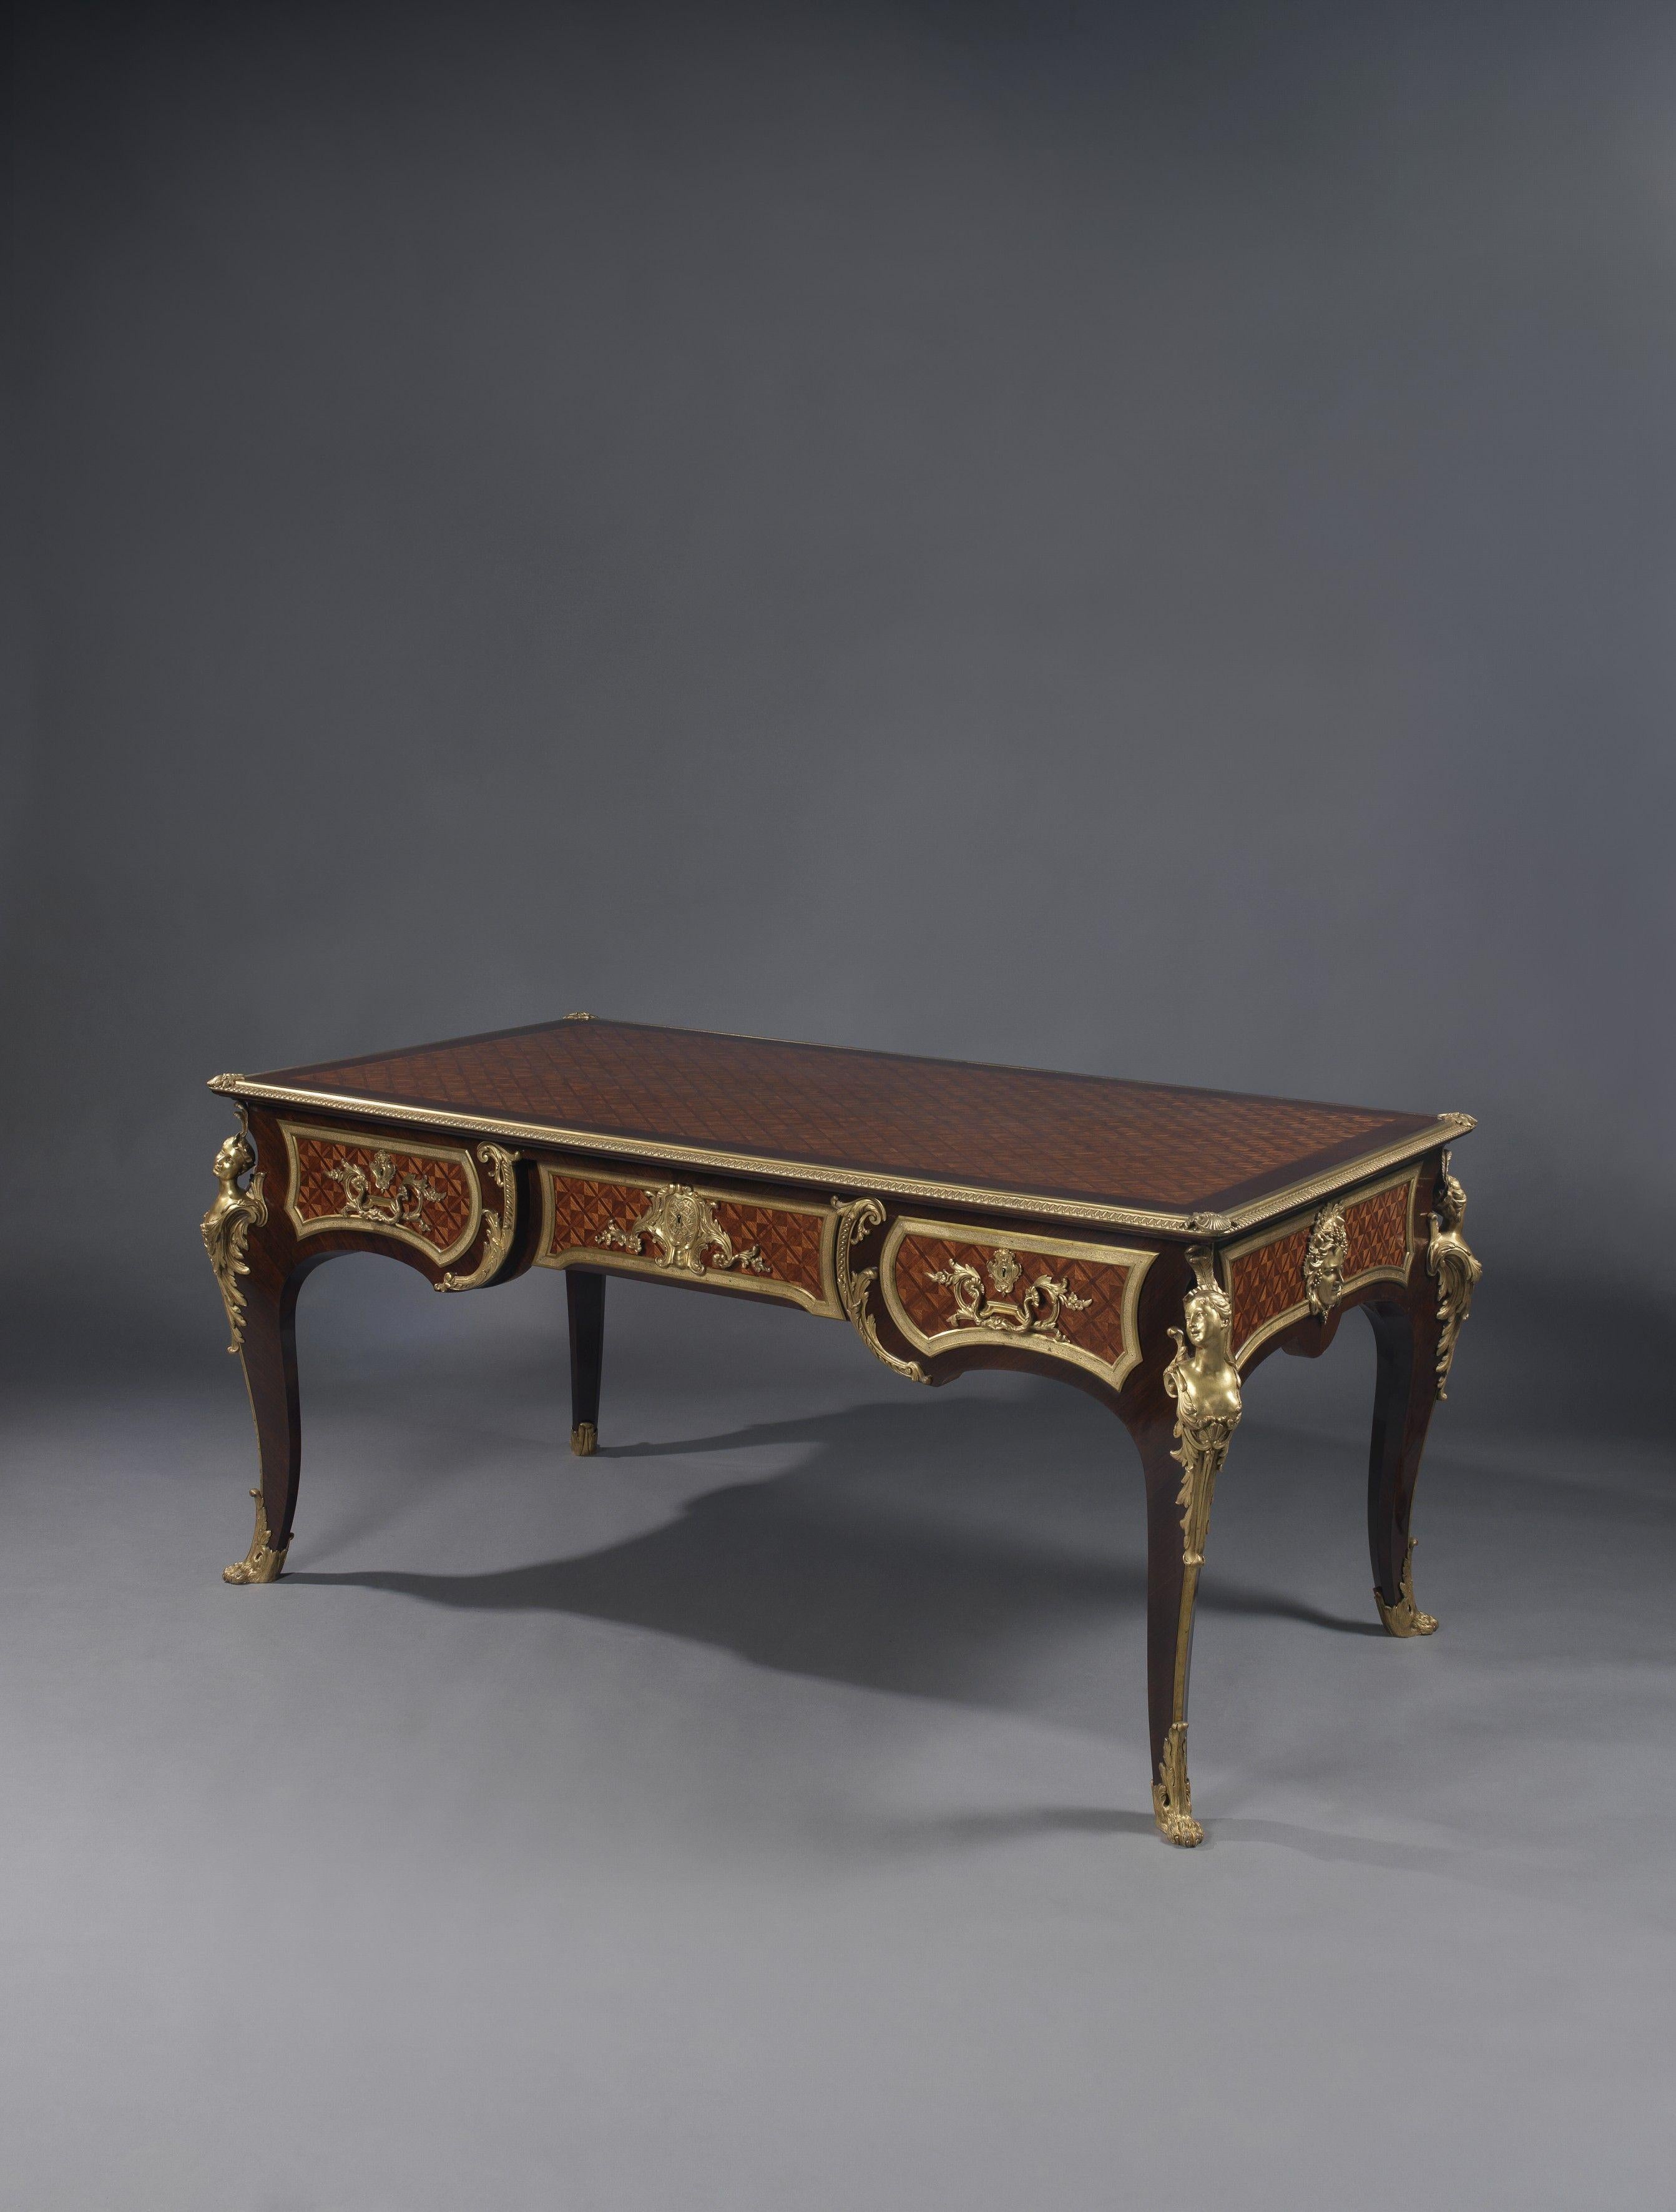 A Magnificent Regence Style gilt bronze Mounted Trellis Parquetry Bureau Plat by François Linke.

French, circa 1890.

Linke Index No. 795. 
Signed to the gilt bronze border ‘F. Linke’. 
Stamped 'FL' to the reverse of the gilt bronze